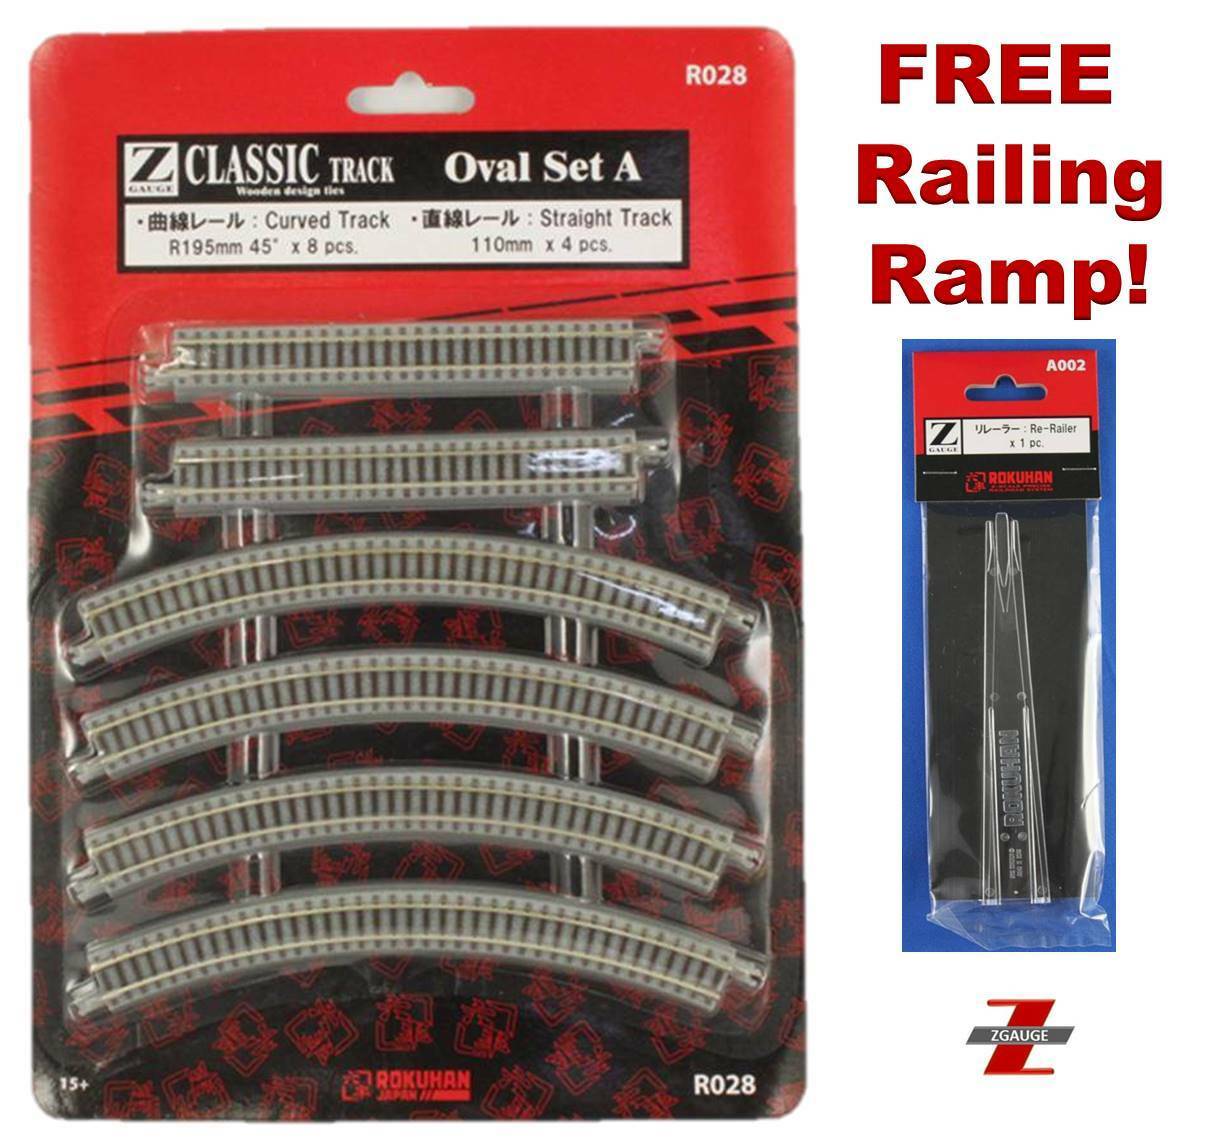 Z Scale Track Set Rokuhan R028 Oval Set Ships Now From Usa! Free Railing Ramp!